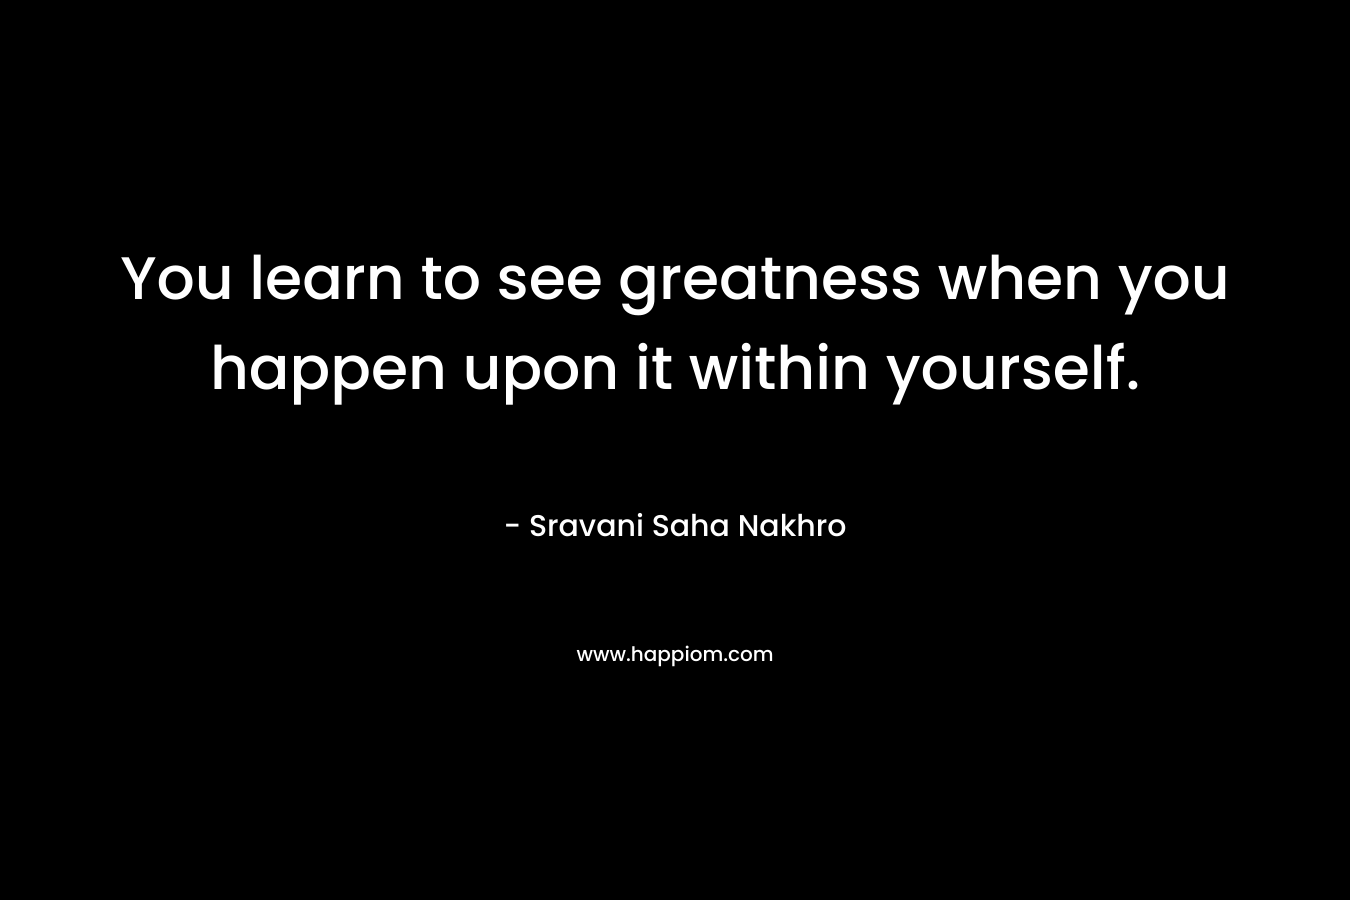 You learn to see greatness when you happen upon it within yourself.